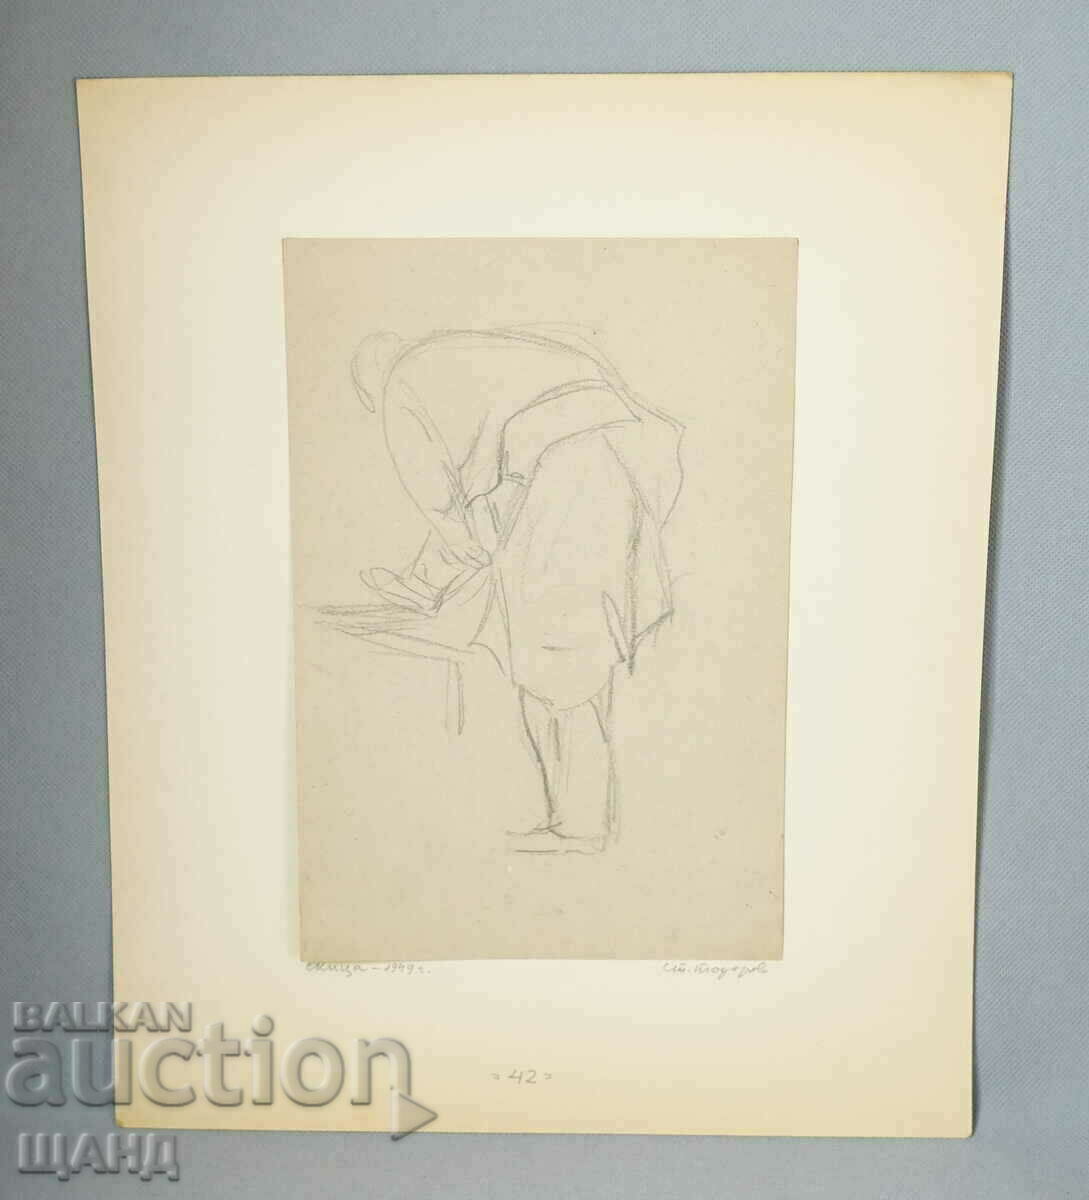 1949 Stoyu Todorov drawing sketch pencil project poster